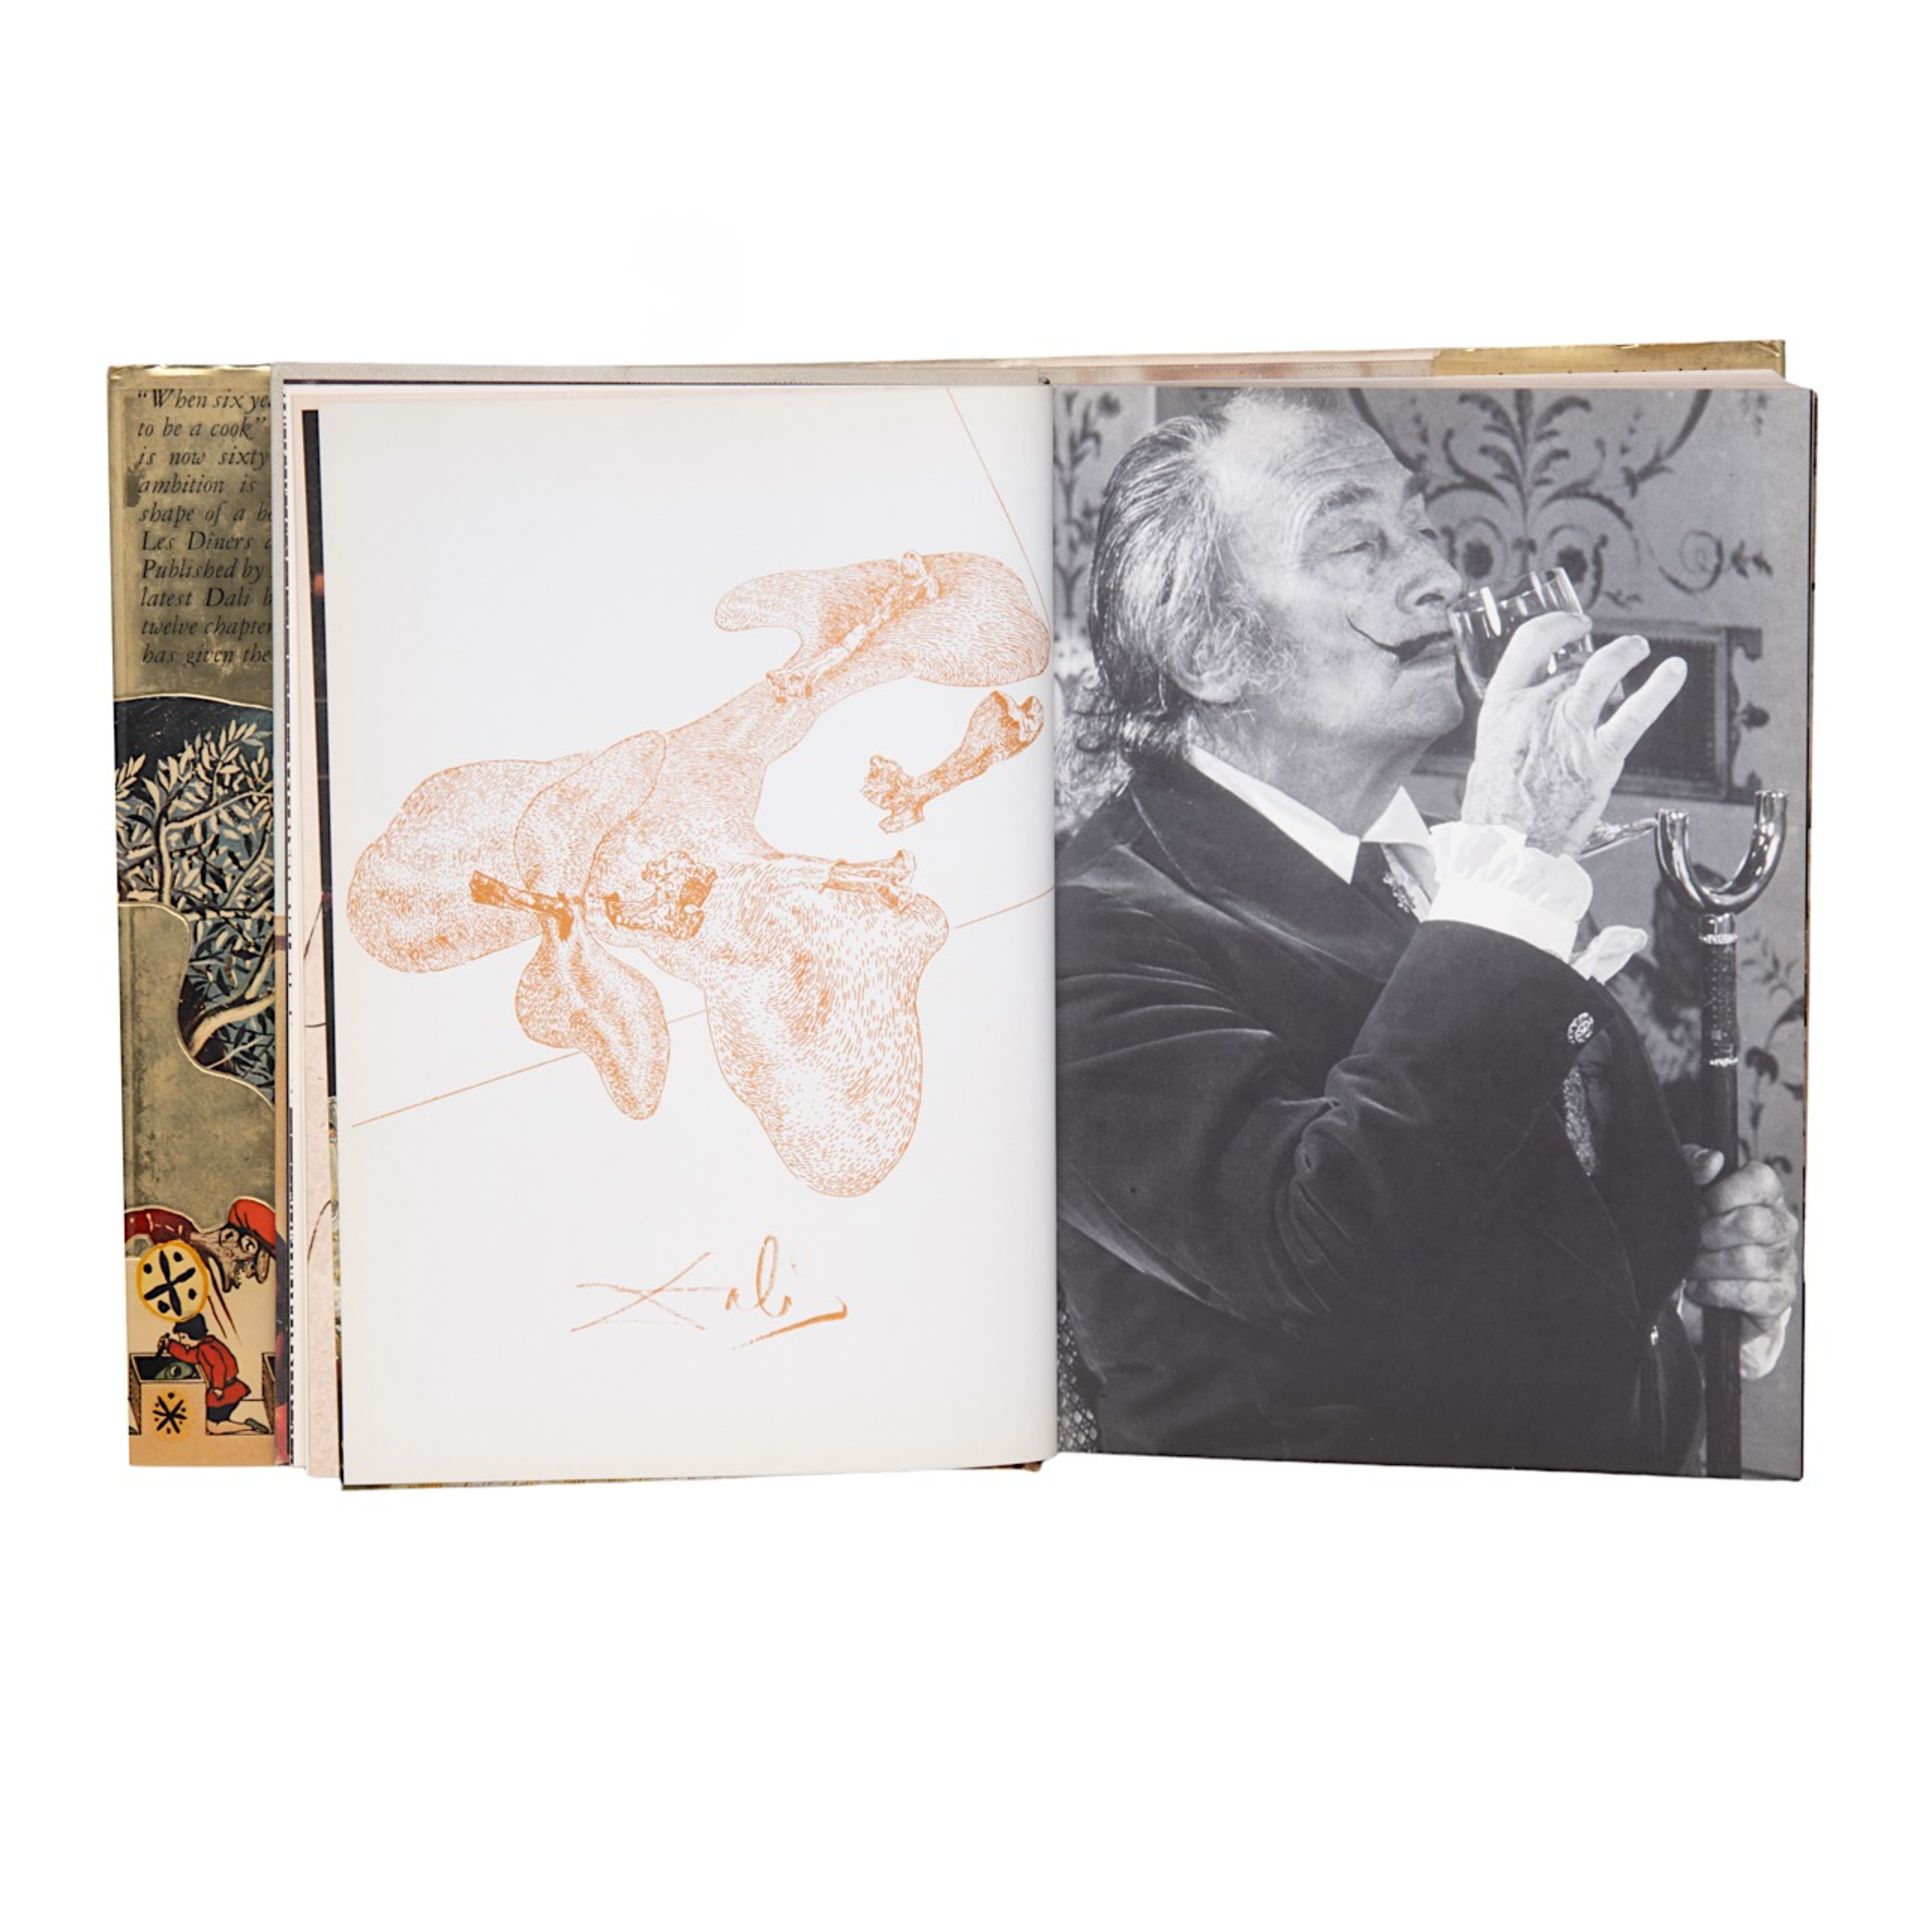 Two gastronomical books by Salvador Dali (1904-1989), 'Les Diners de Gala' and 'The Wines of Gala' - Bild 4 aus 9